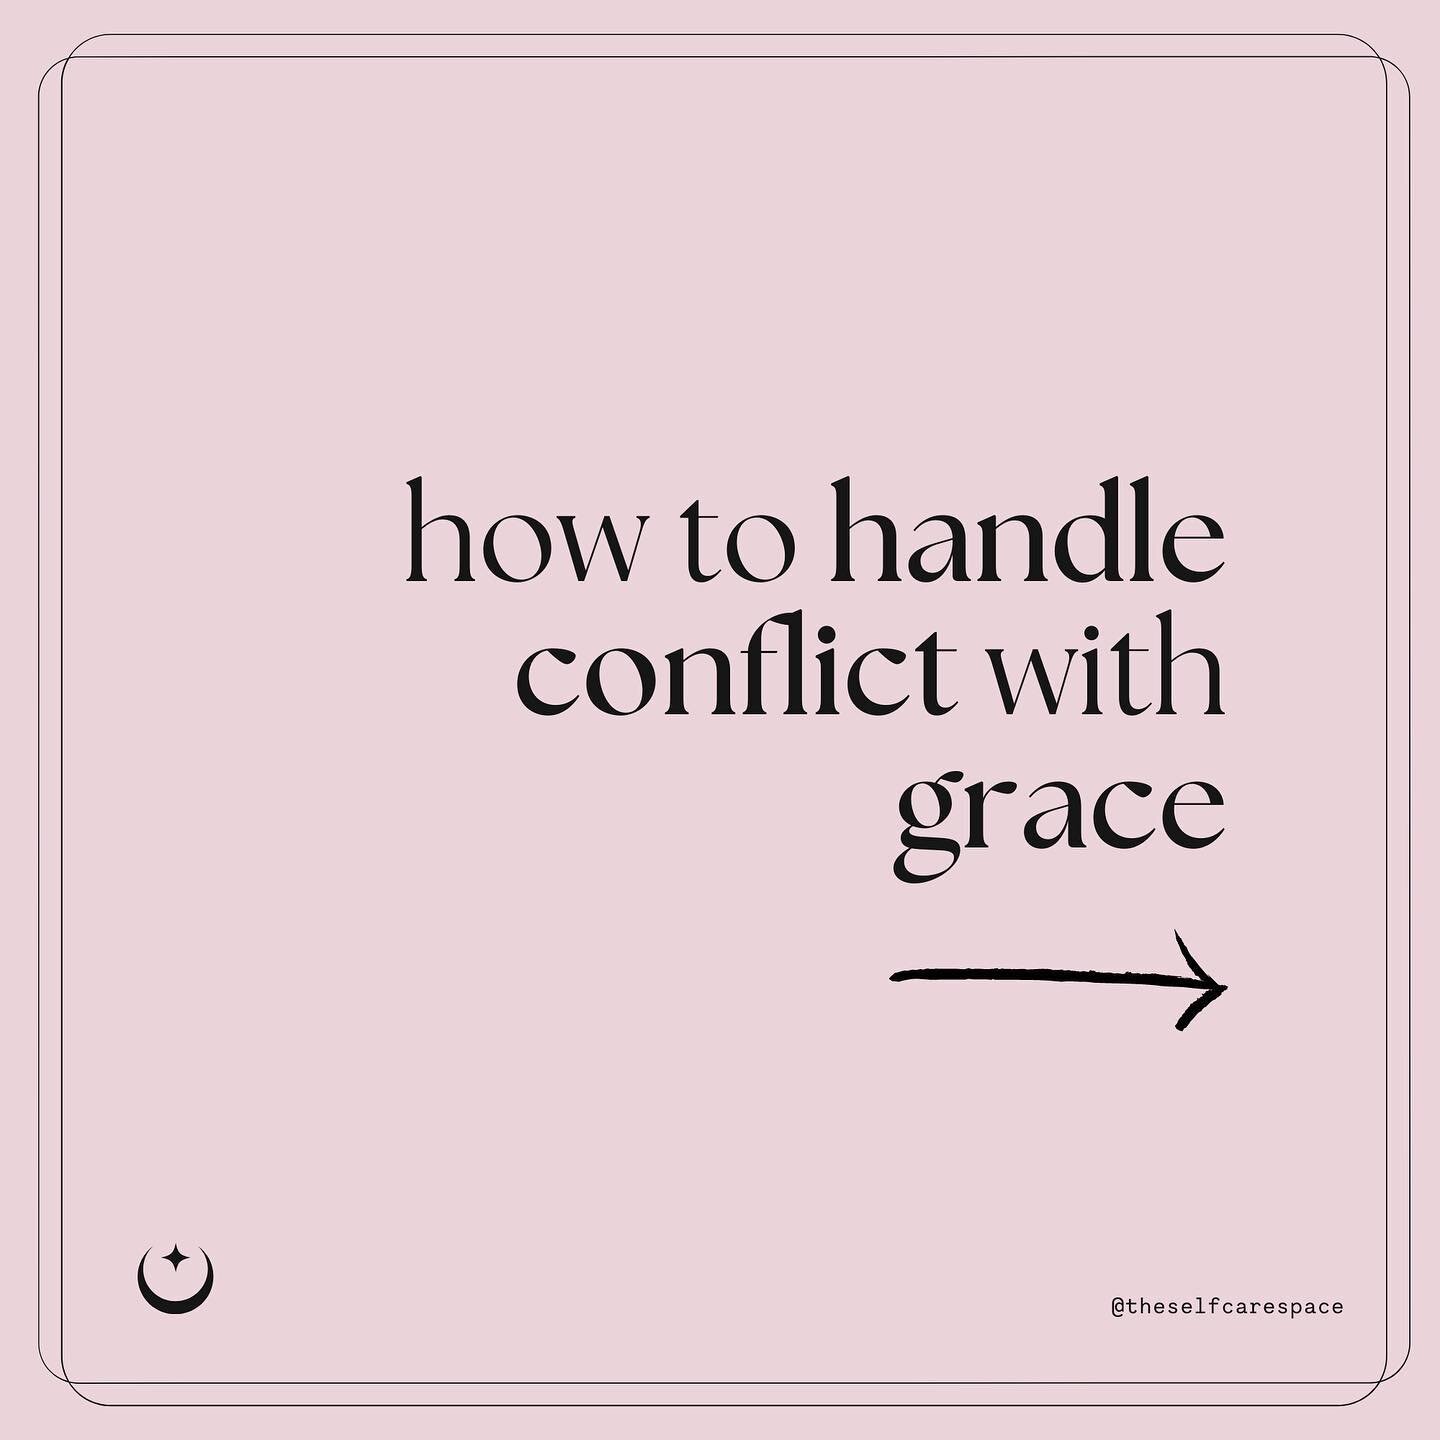 Raise your hand if the thought of confrontation makes you want to RUN.

🙋&zwj;♀️🙋&zwj;♀️🙋&zwj;♀️

You're not alone. You may have learned growing up that conflict was quite literally unsafe, and it was a better option to stay quiet or keep the peac